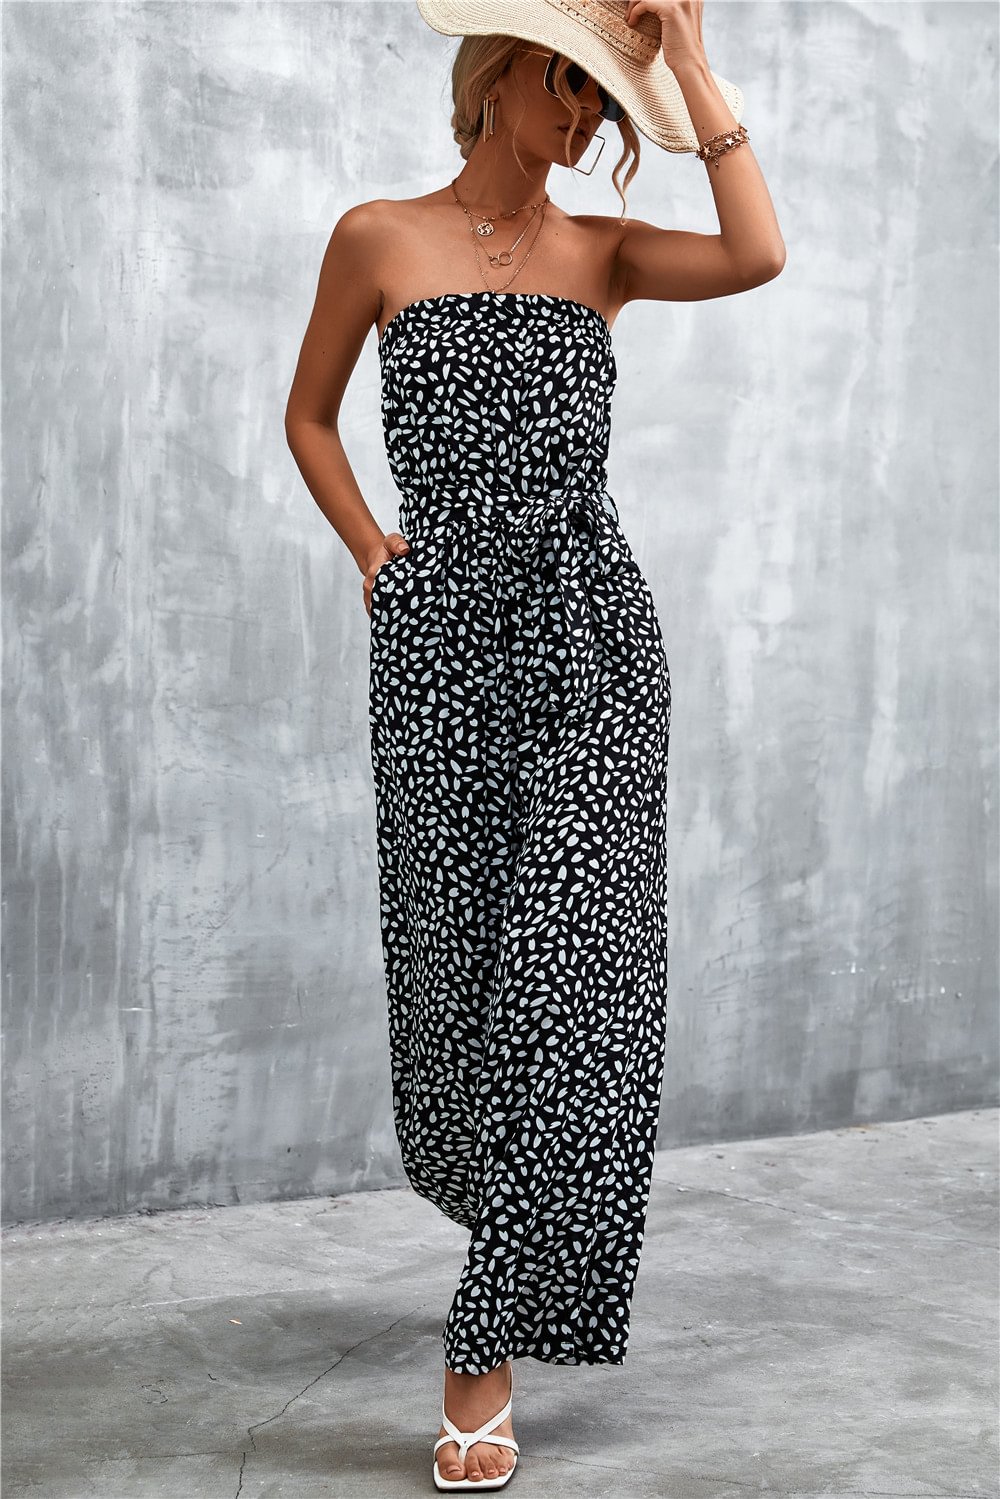 Sexy Tube Top Lace Printing Jumpsuit Women